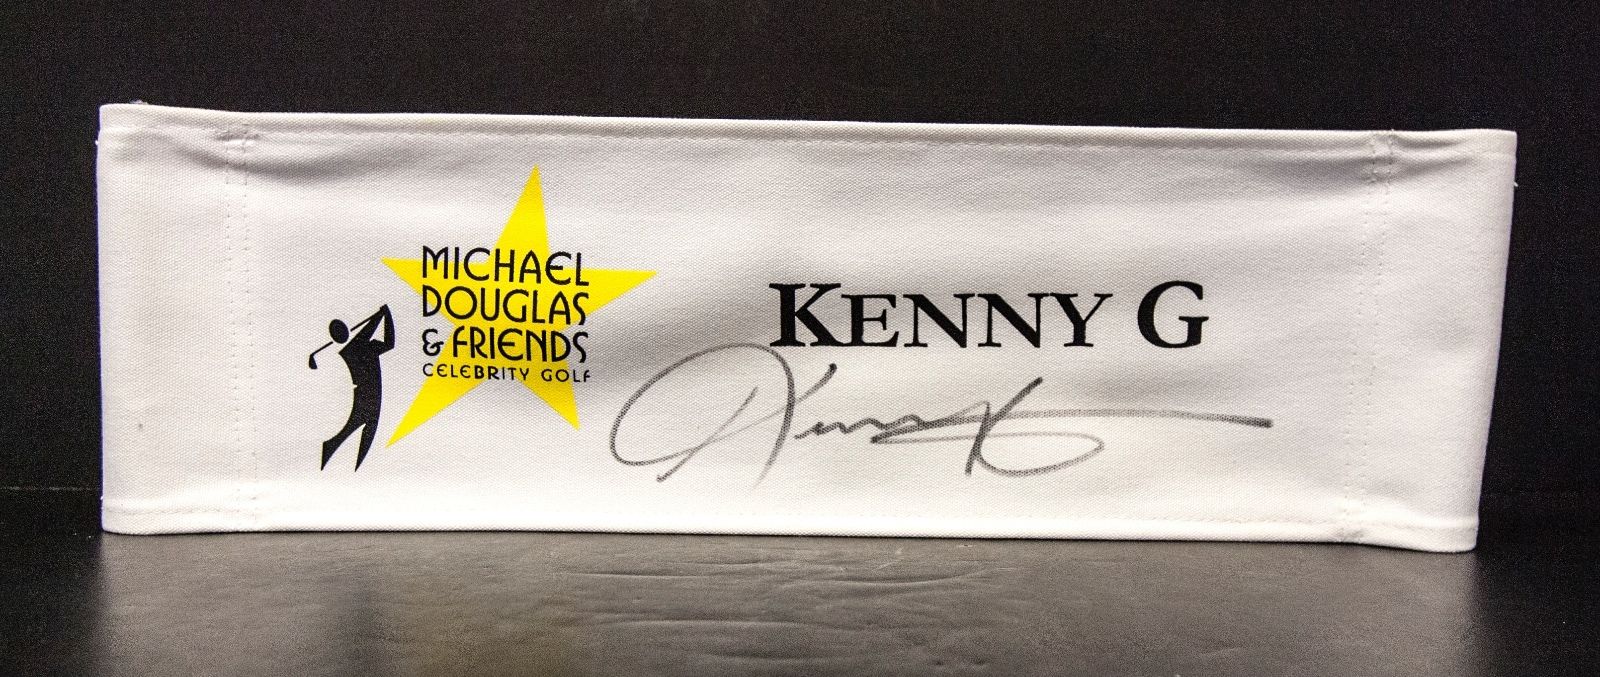 KENNY G AUTOGRAPHED DIRECTORS CHAIR BACK FROM MICHAEL DOUGLAS GOLF TOURNAMENT